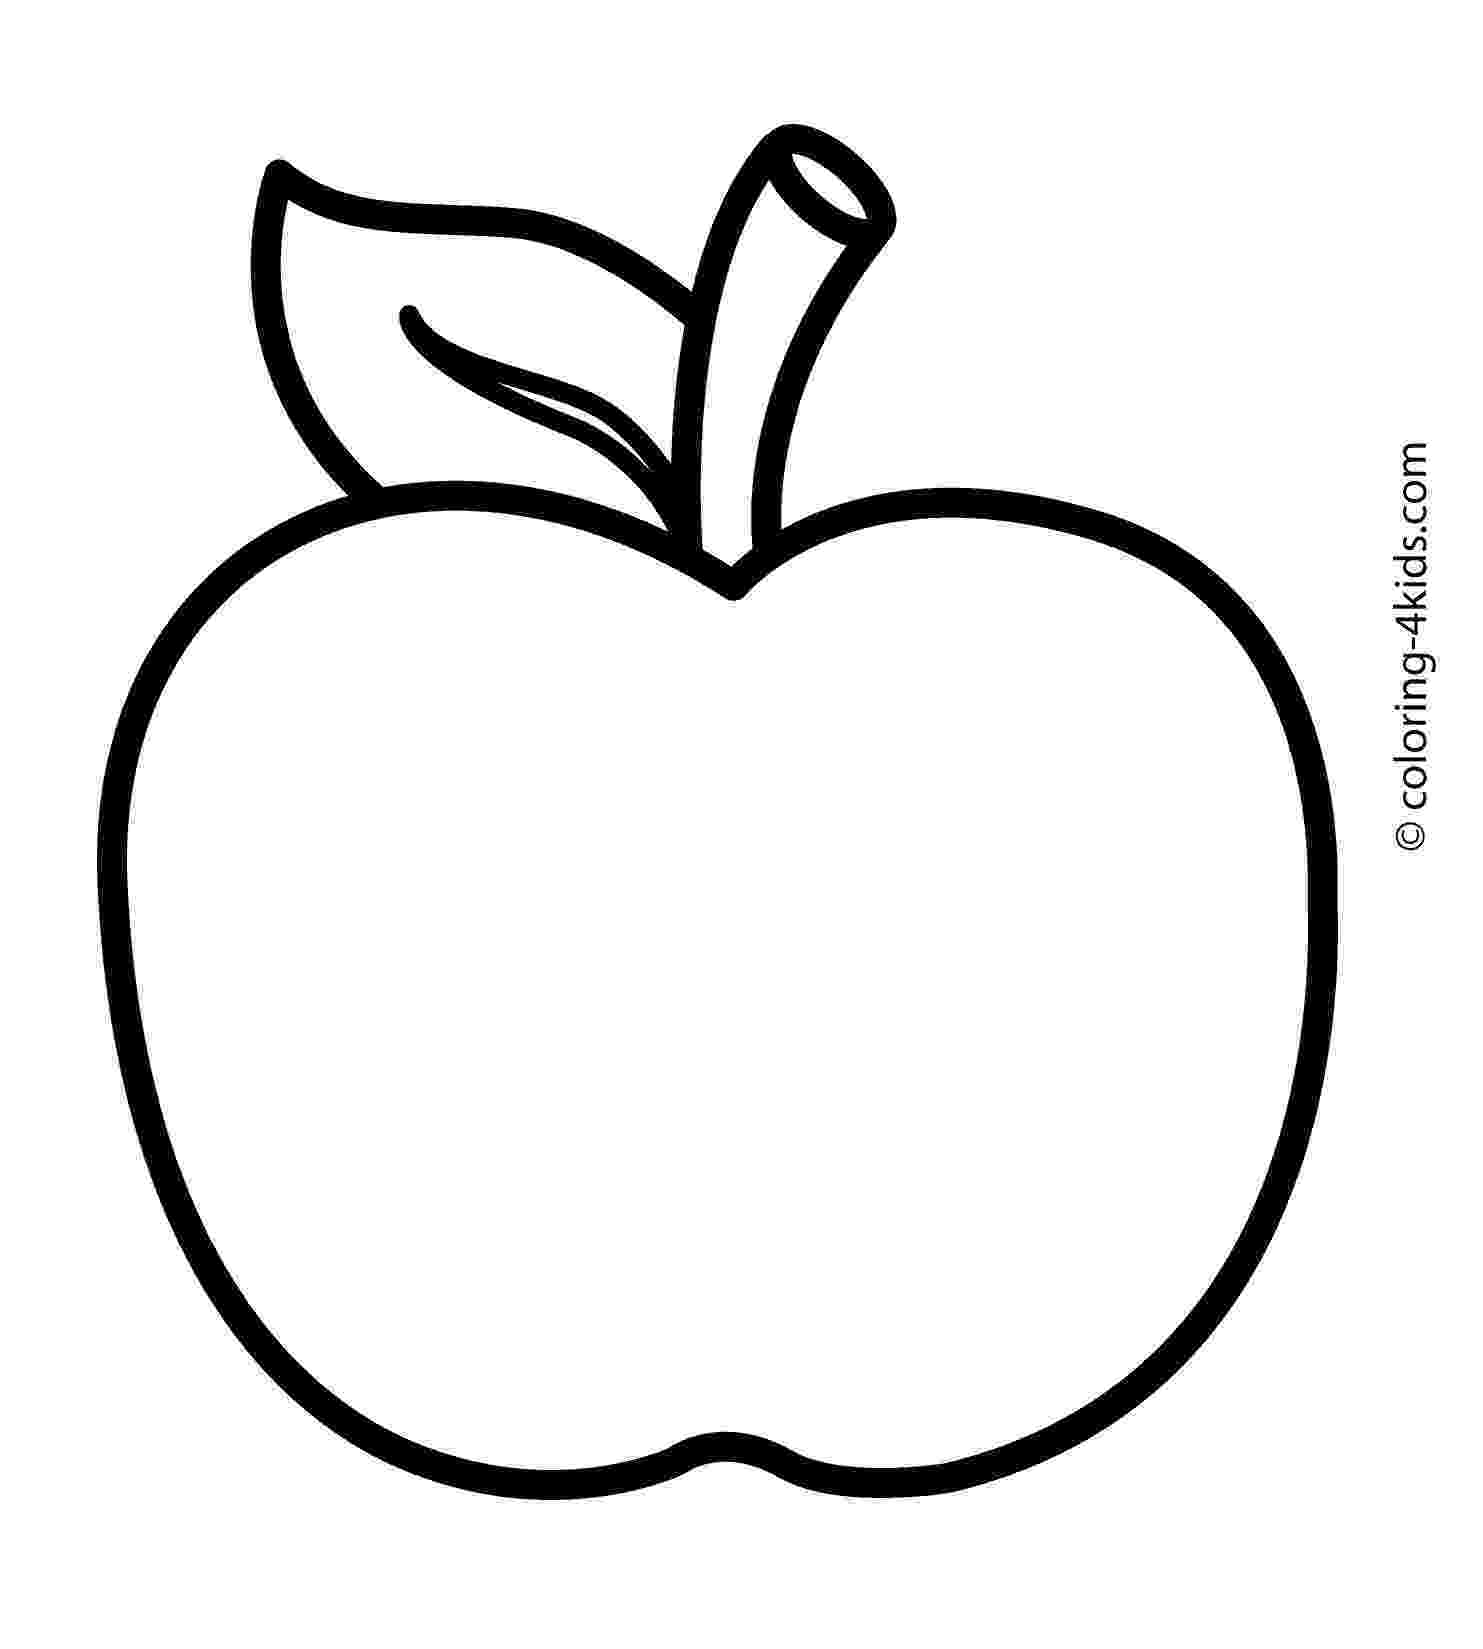 picture of apples apple coloring pages fotolipcom rich image and wallpaper of apples picture 